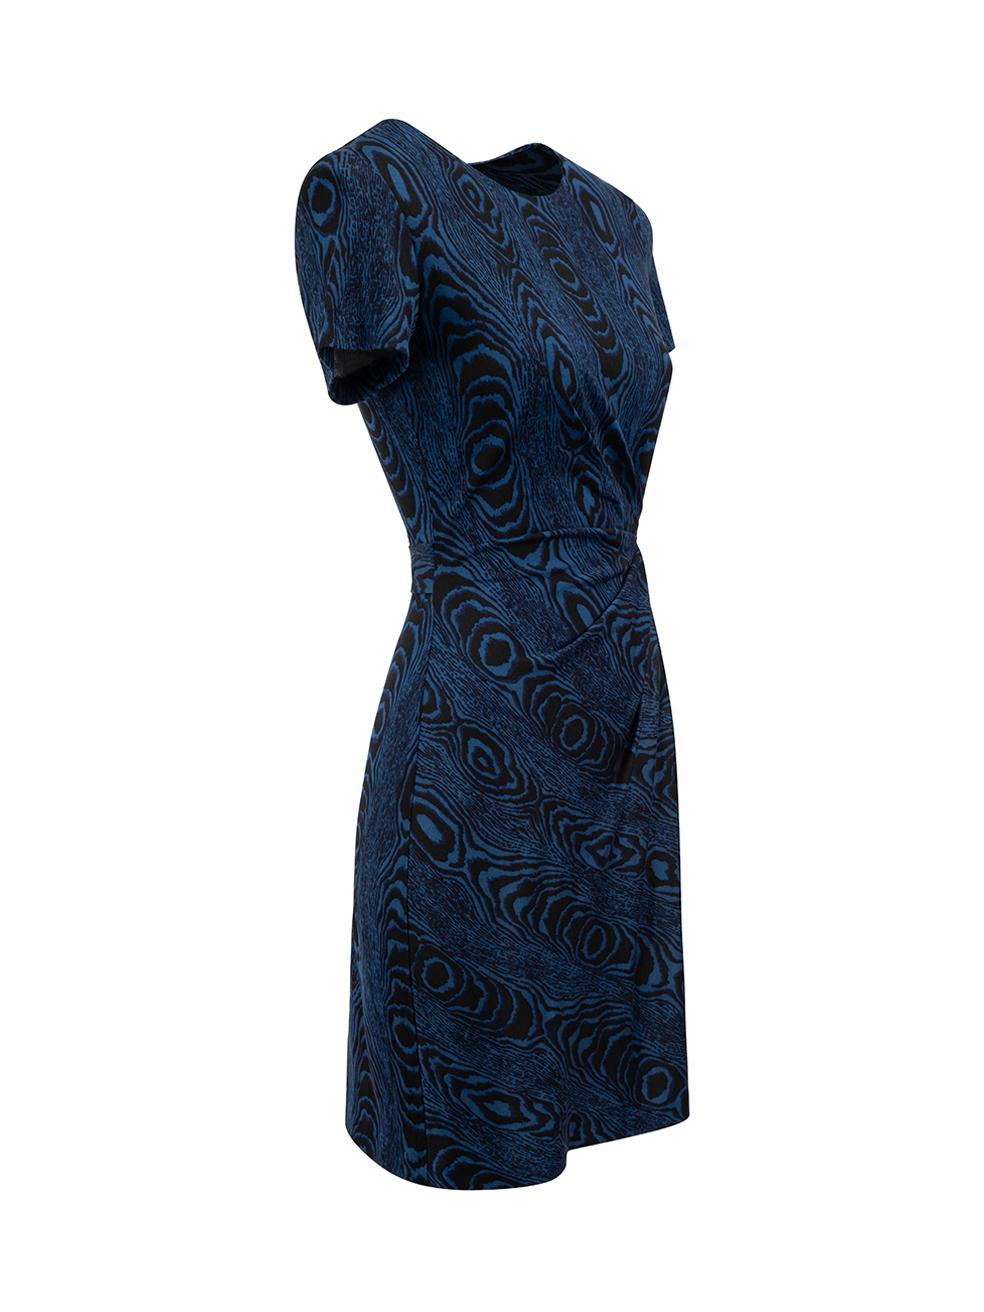 CONDITION is Never worn, with tags. No visible wear to dress is evident on this new Diane Von Furstenberg designer resale item.
  
Details
Zoe model
Blue
Silk
Dress
Mini
Wood pattern
Short sleeves
Round neckline
Side ruffle detail
Belt tie

Made in